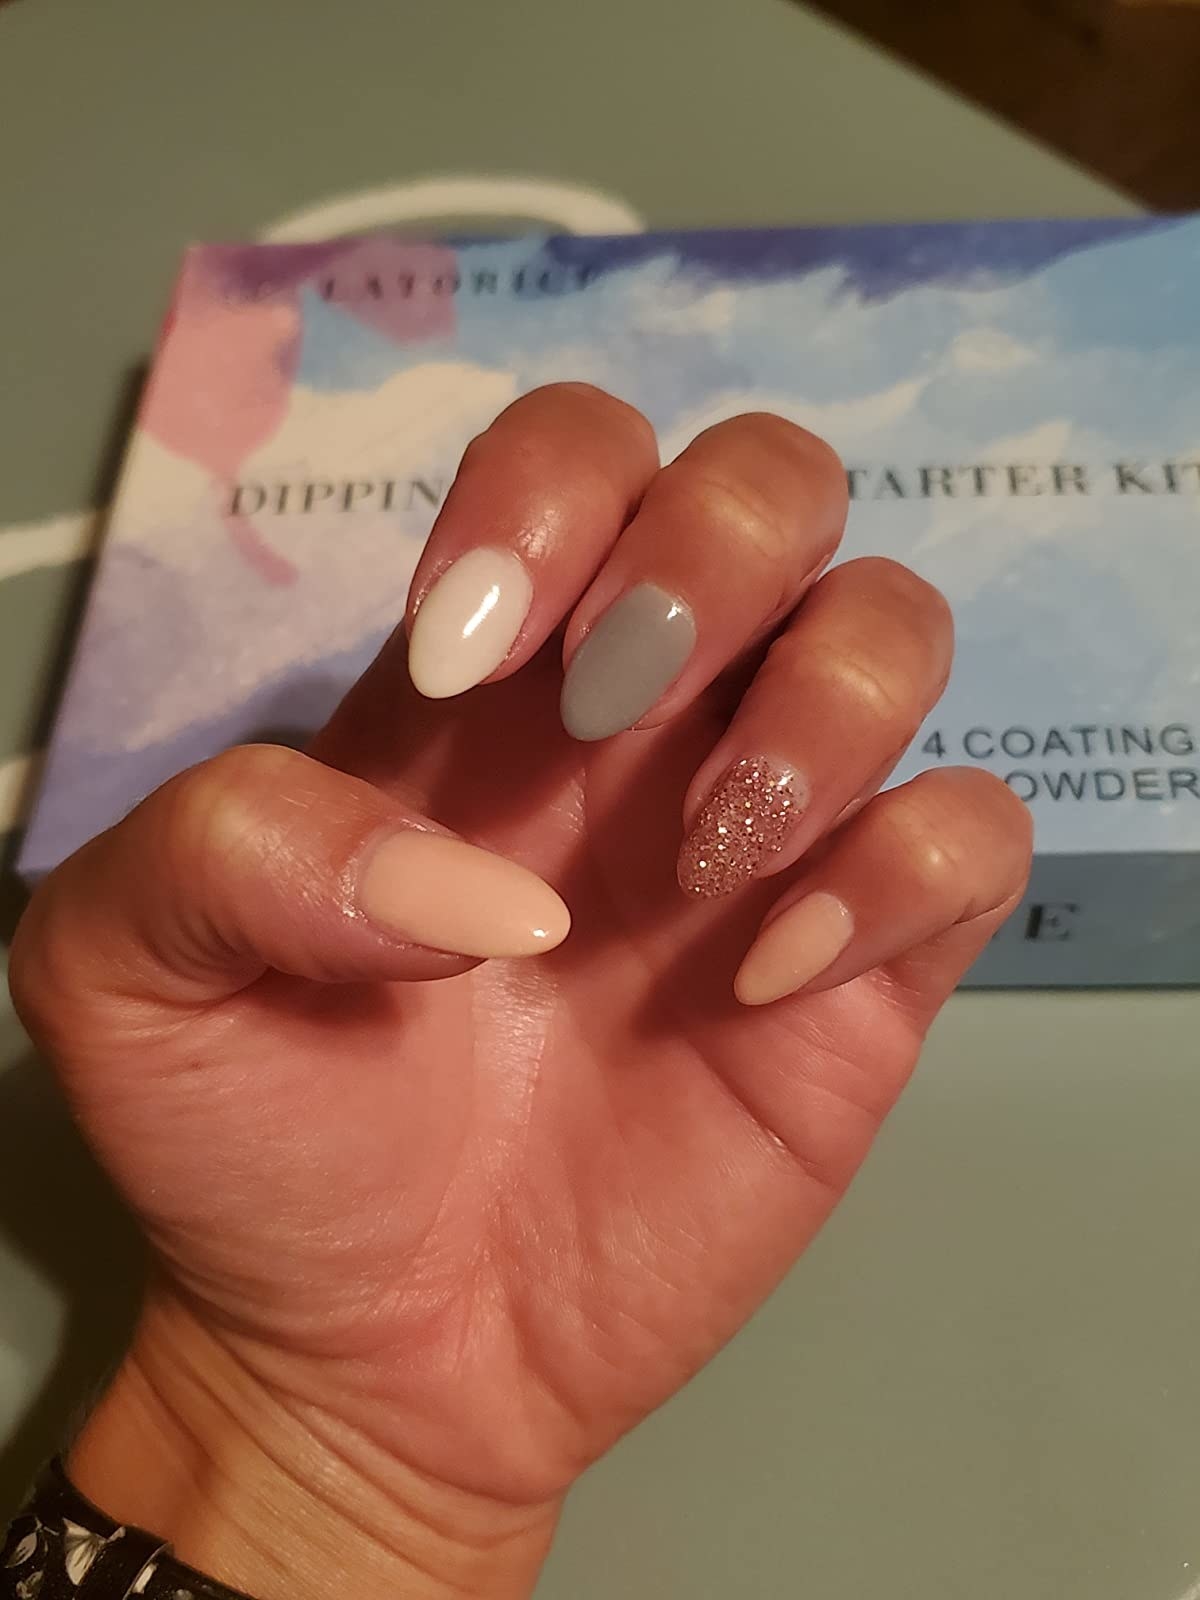 reviewer with pale pink thumb and pinky nails, a white index finger nail, a gray middle finger nail, and a pink glitter accent nail